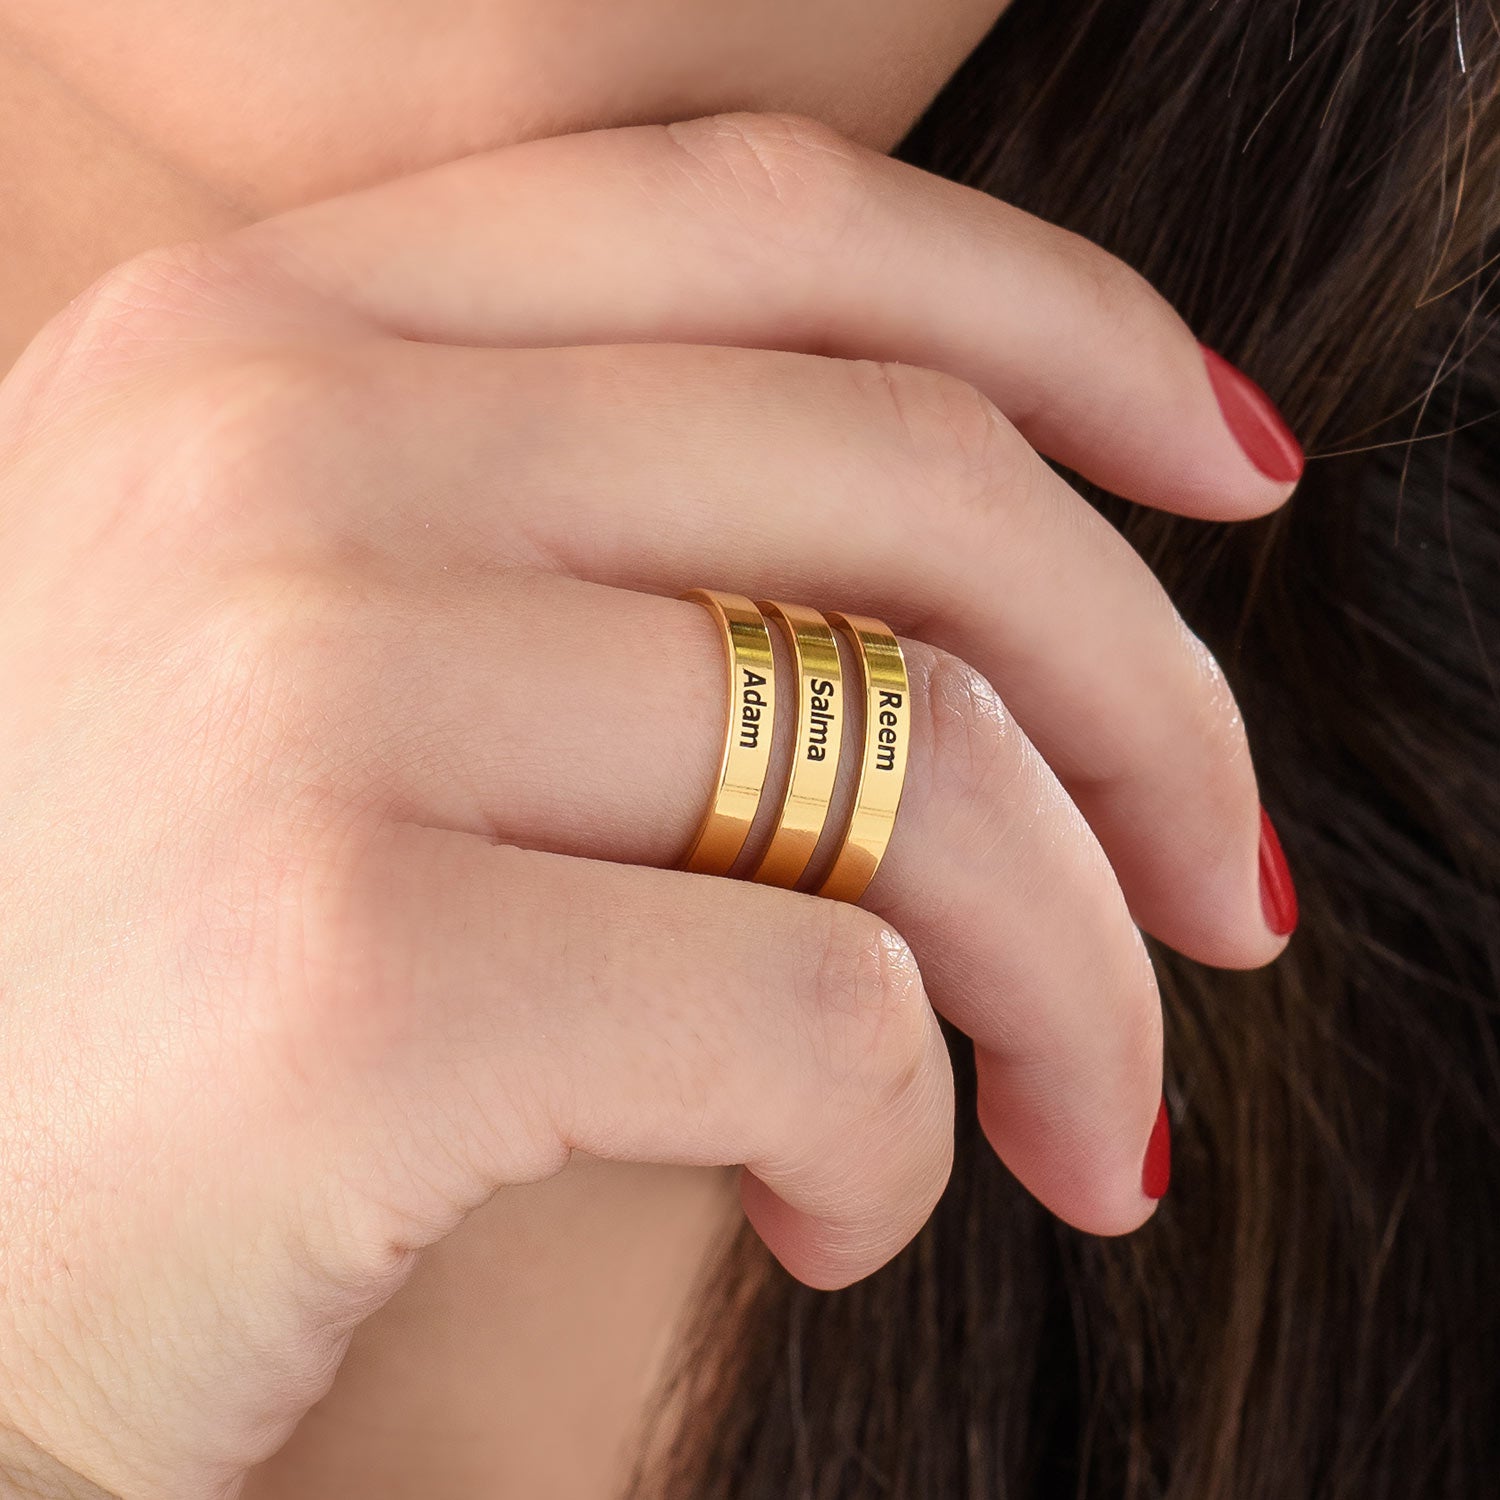 Gold plated ring with three names